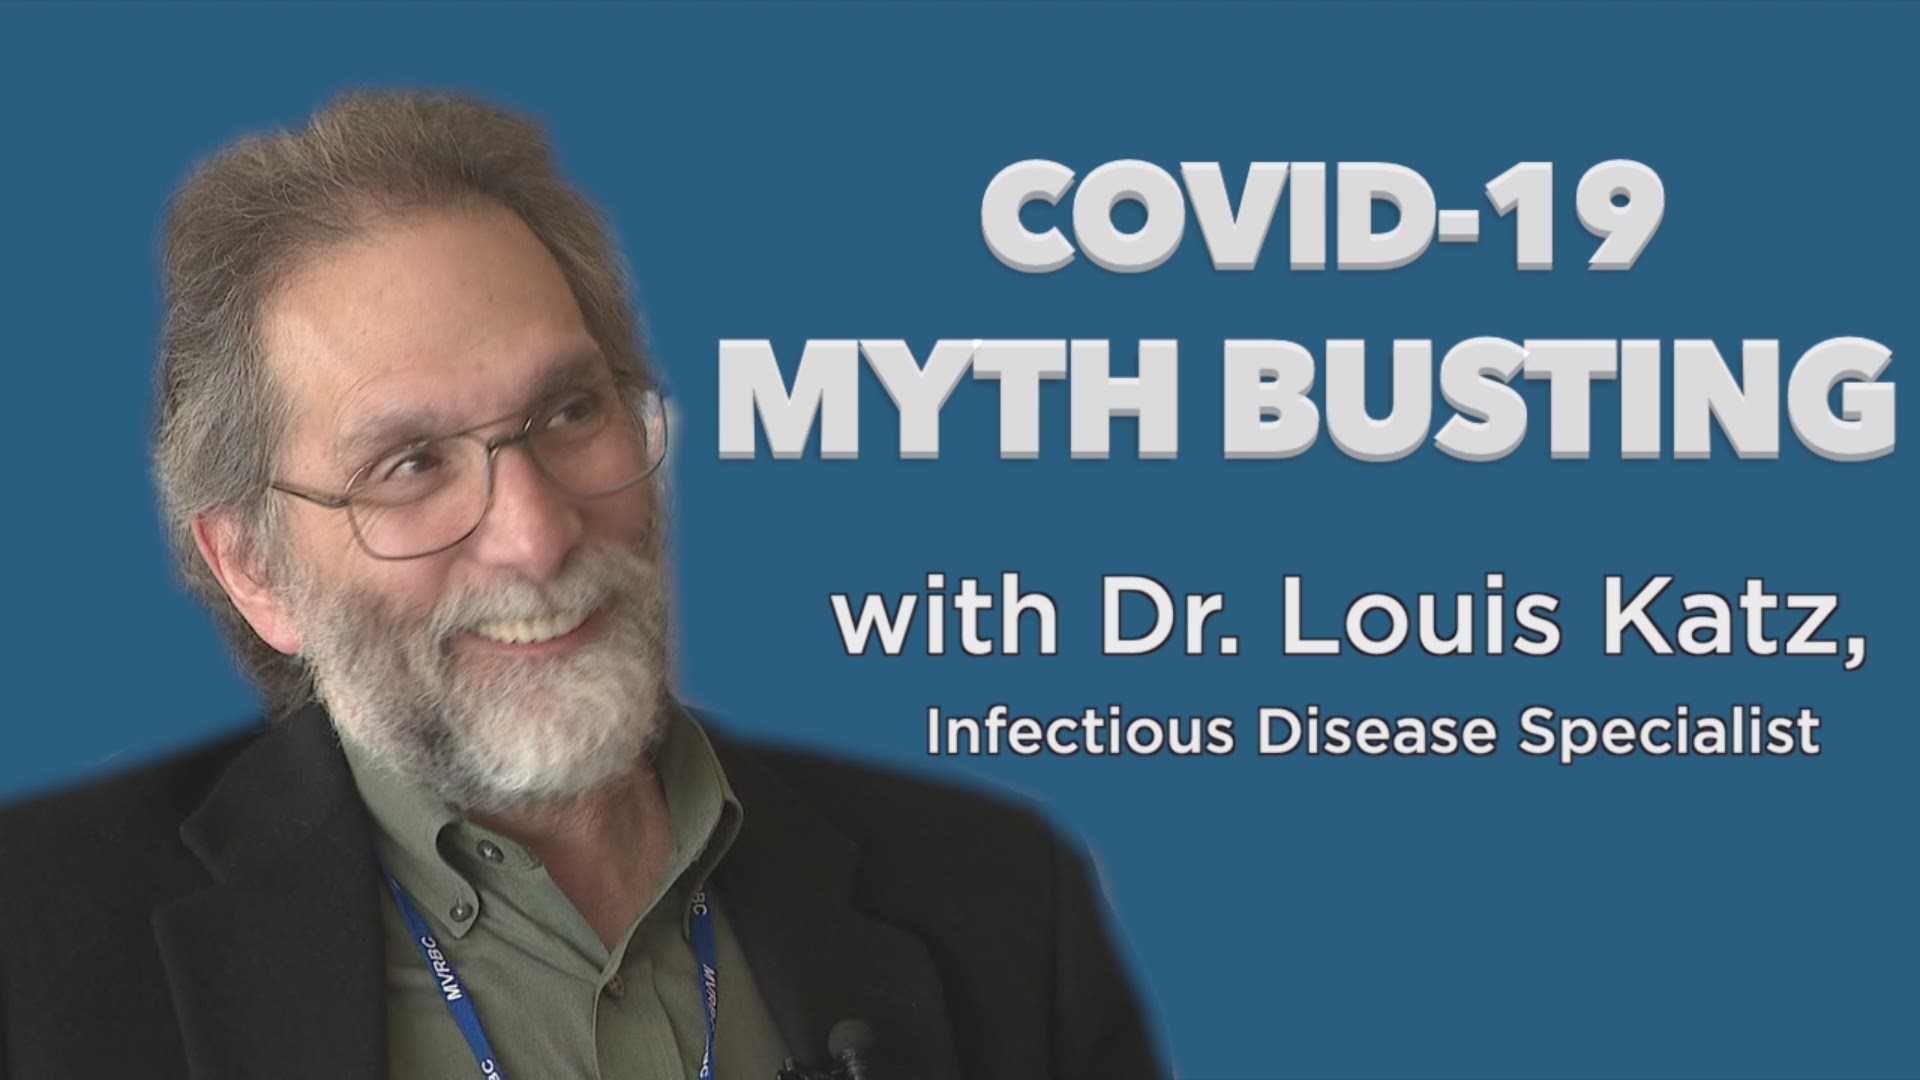 Dr. Louis Katz is explaining what's real vs. what's hearsay when it comes to COVID-19.